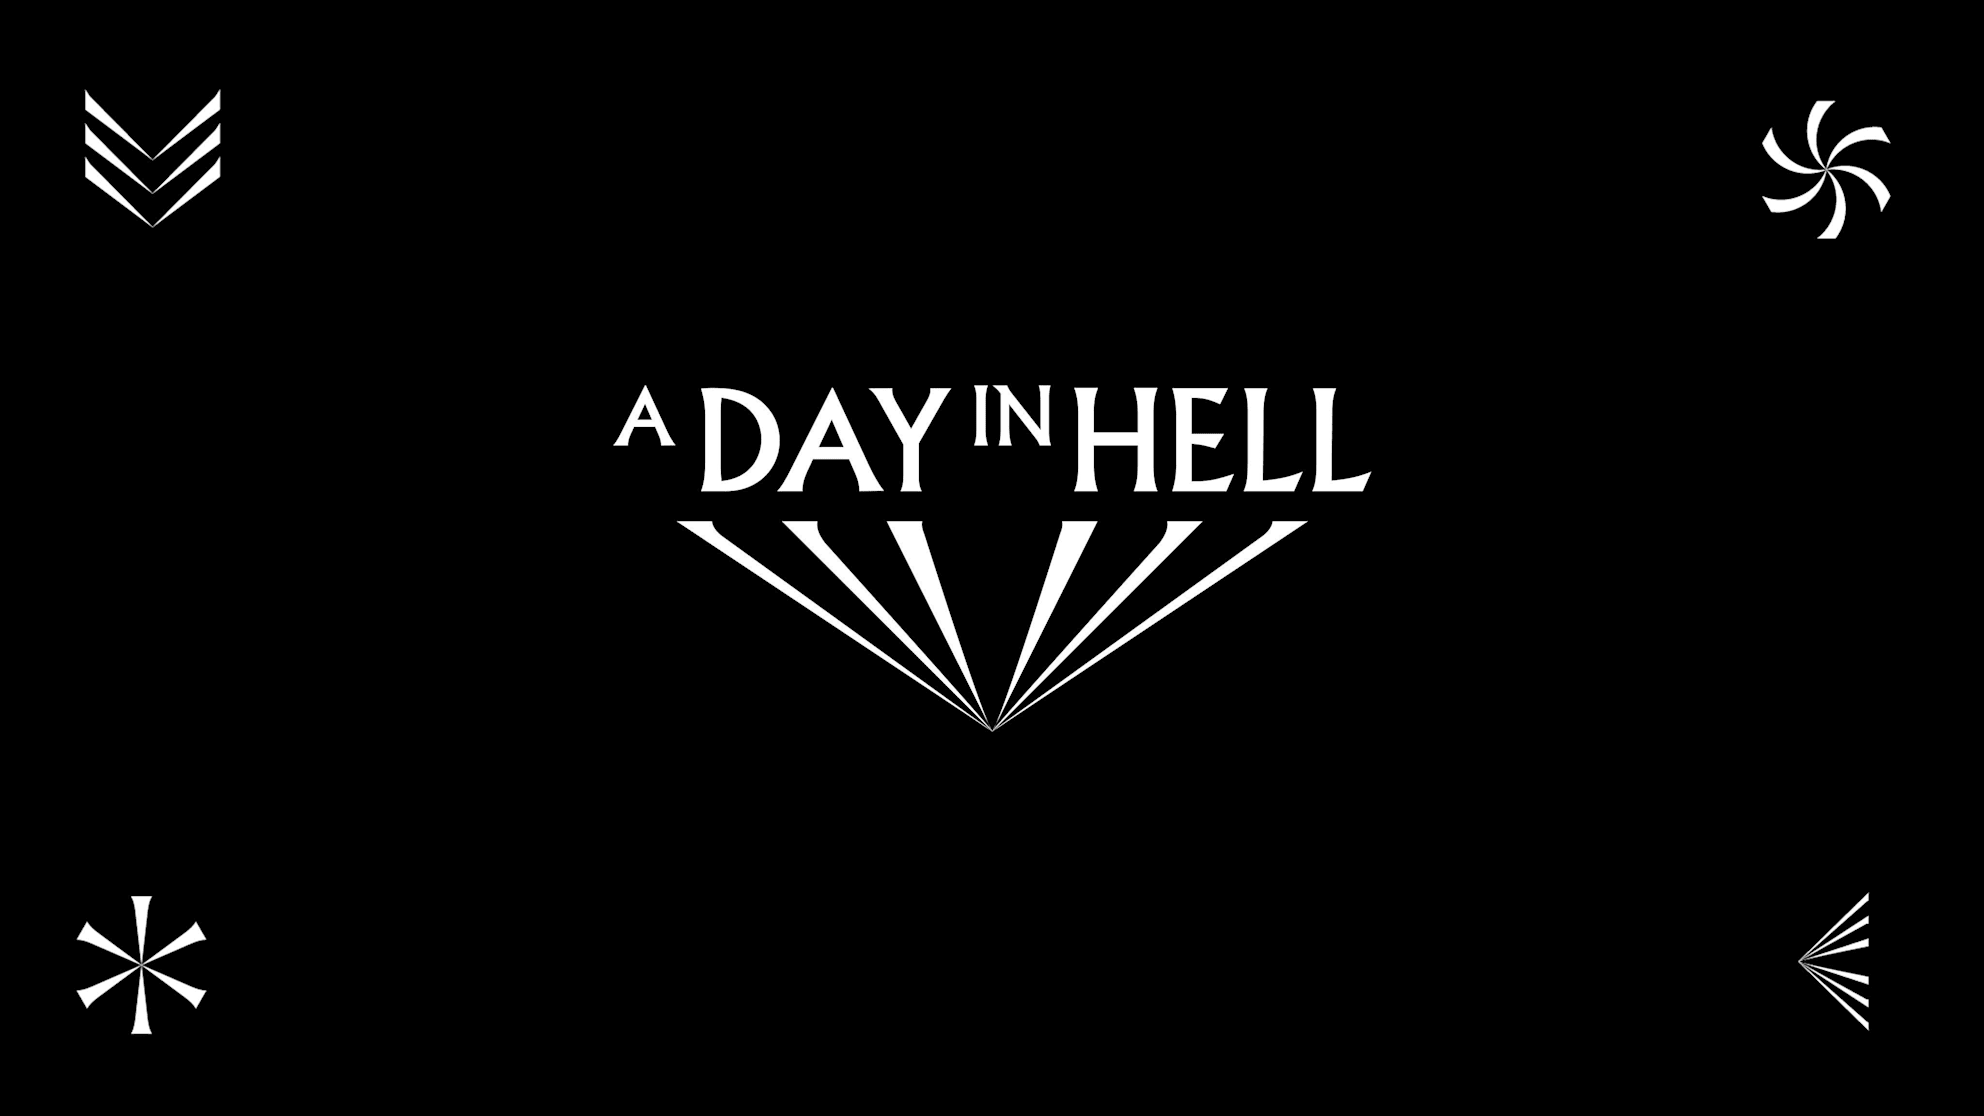 A Day in Hell